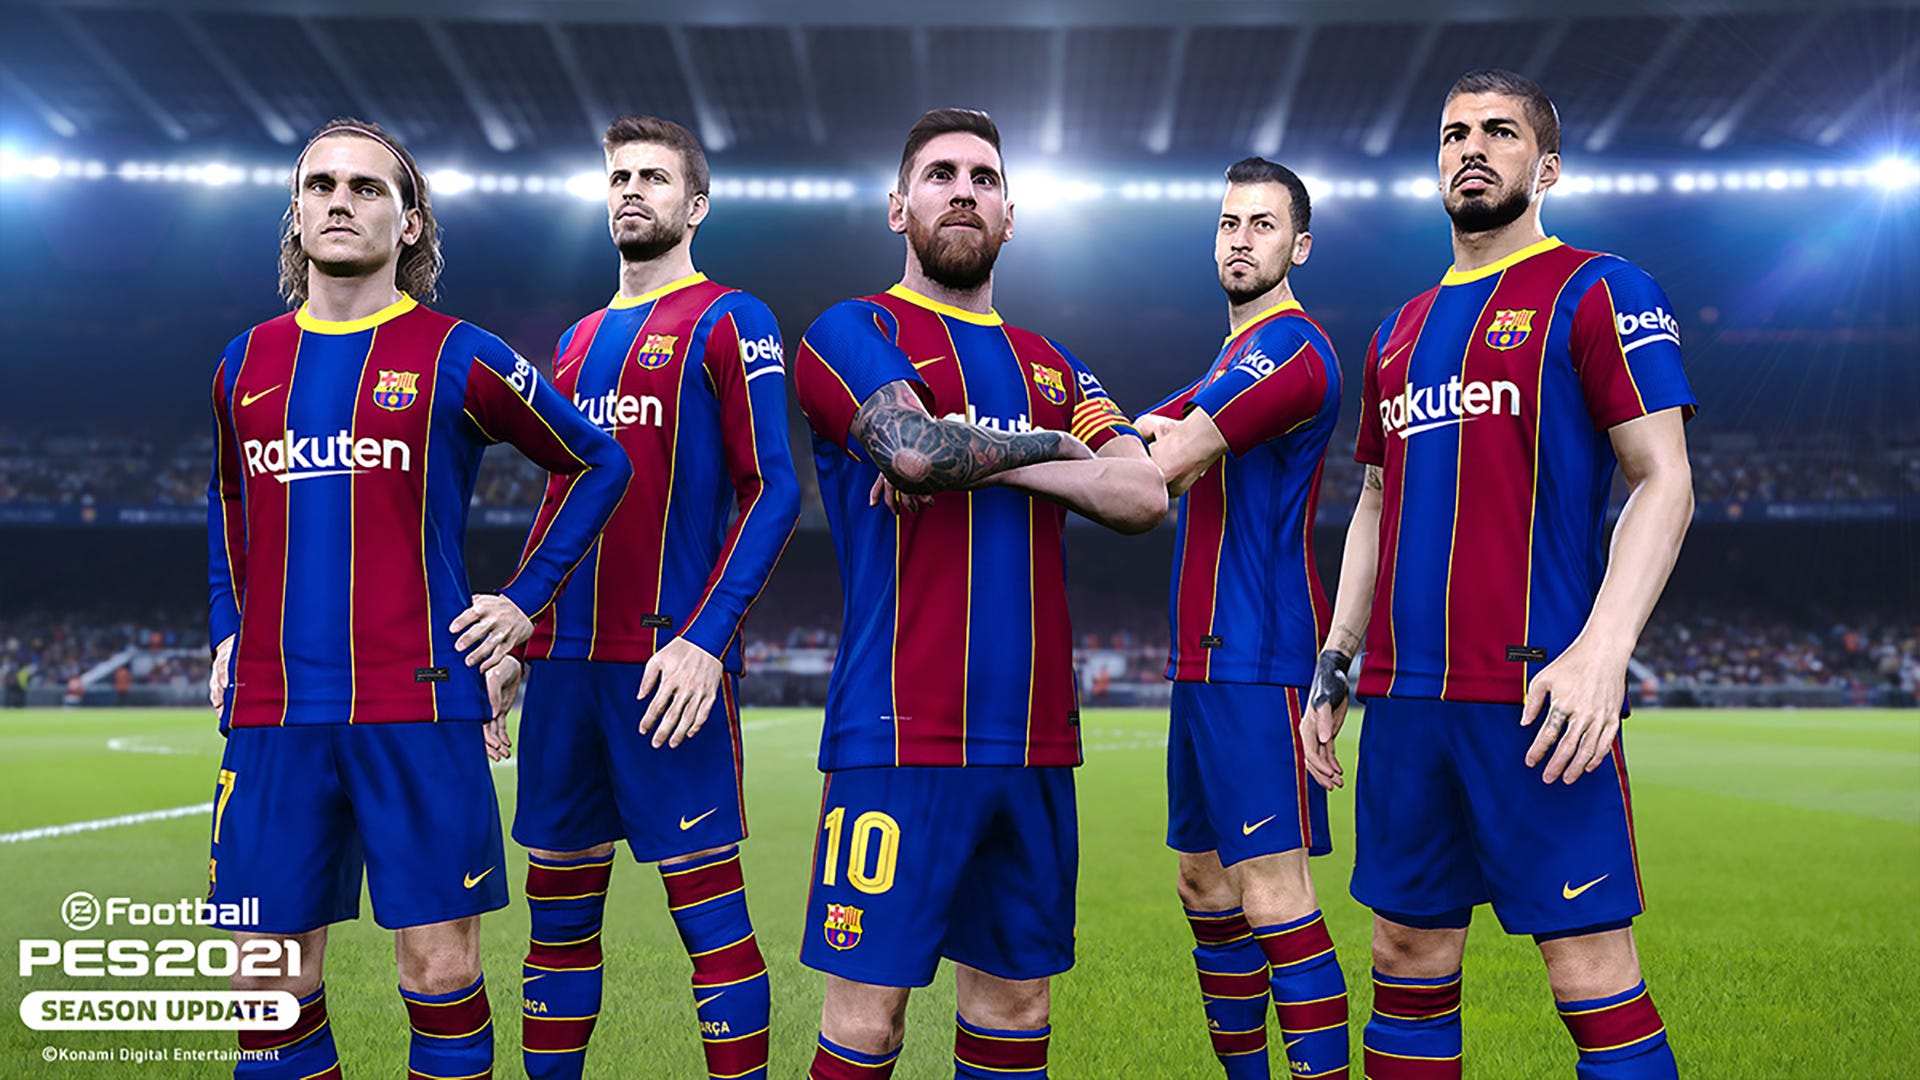 PES 2021 MOD PES 2012 Apk Download for Android - Top Android